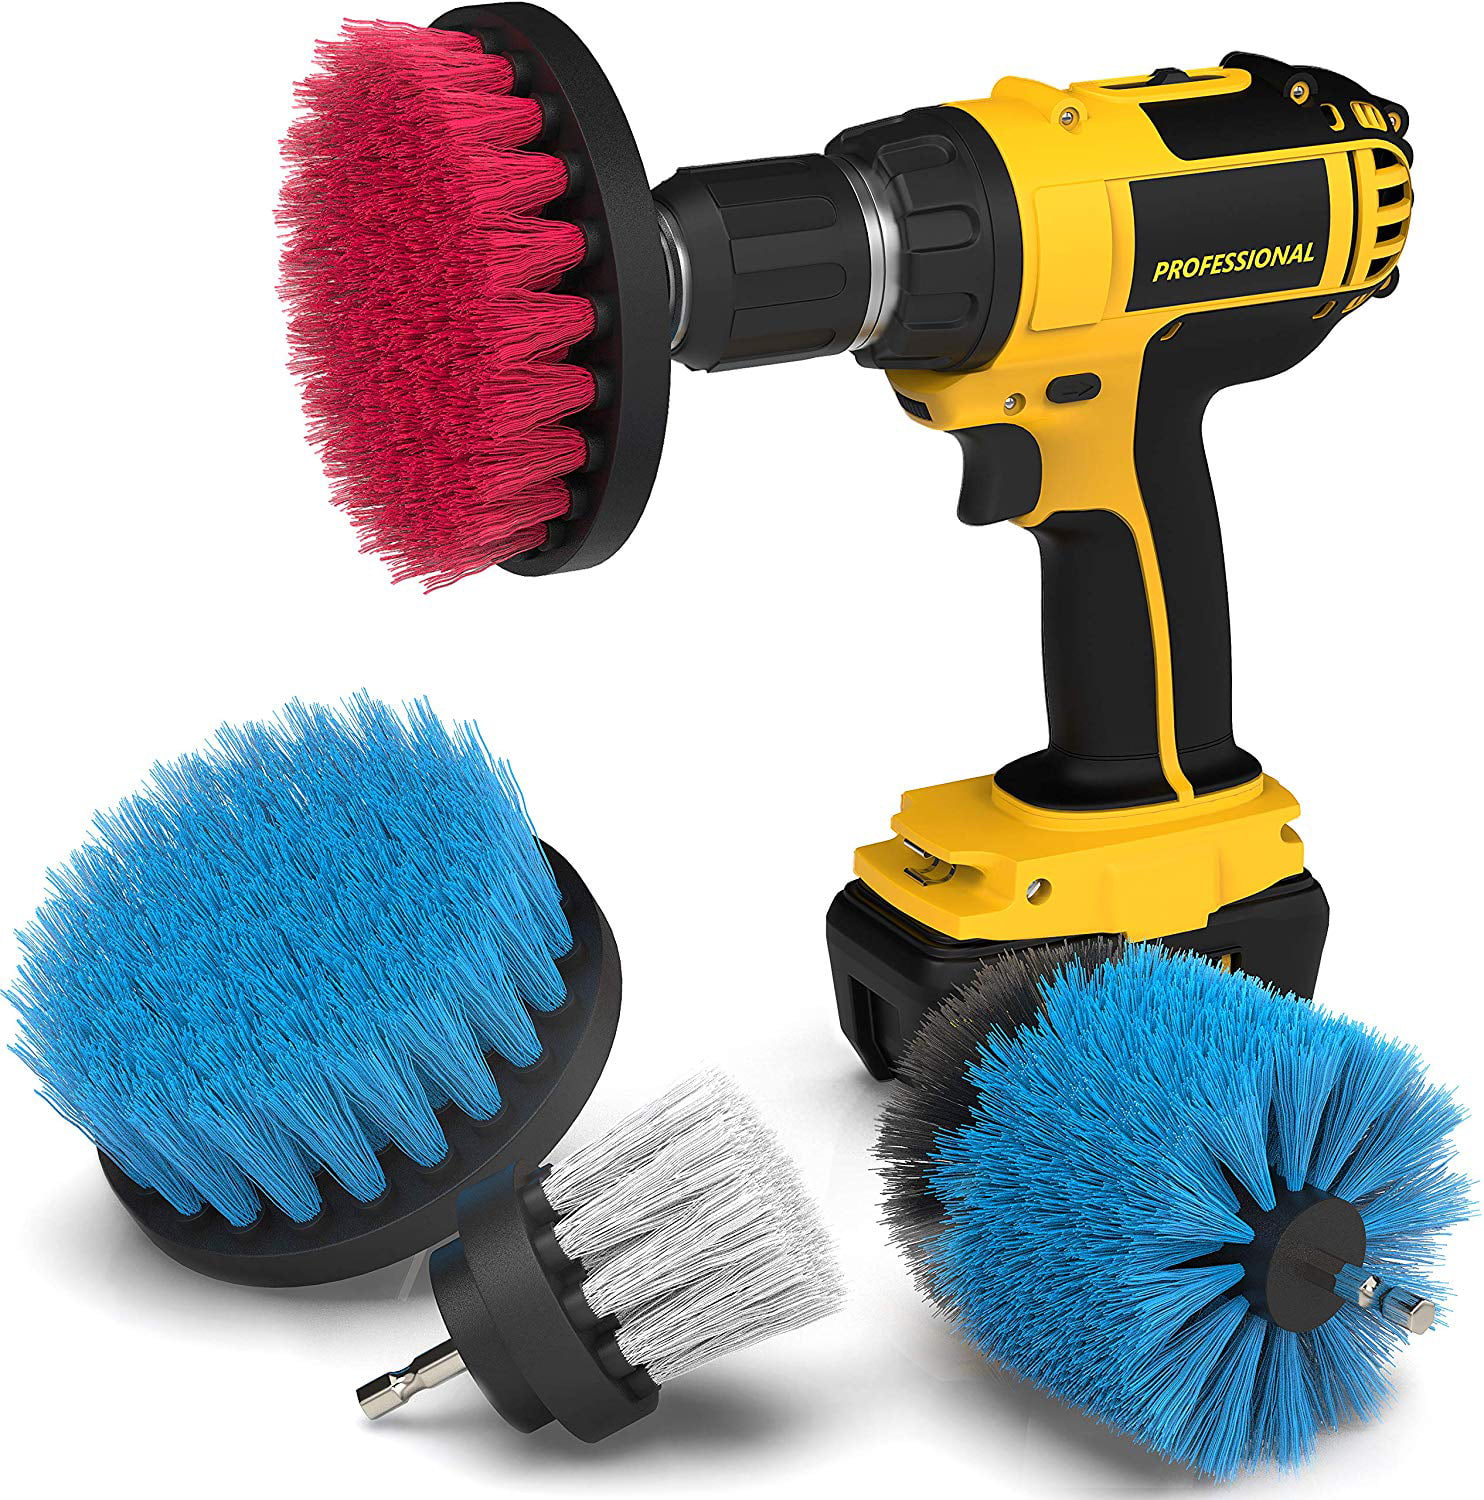 6pcs Tile Grout Power Scrubber Drill Brush Attachment Tub Cleaning Scumbusting 